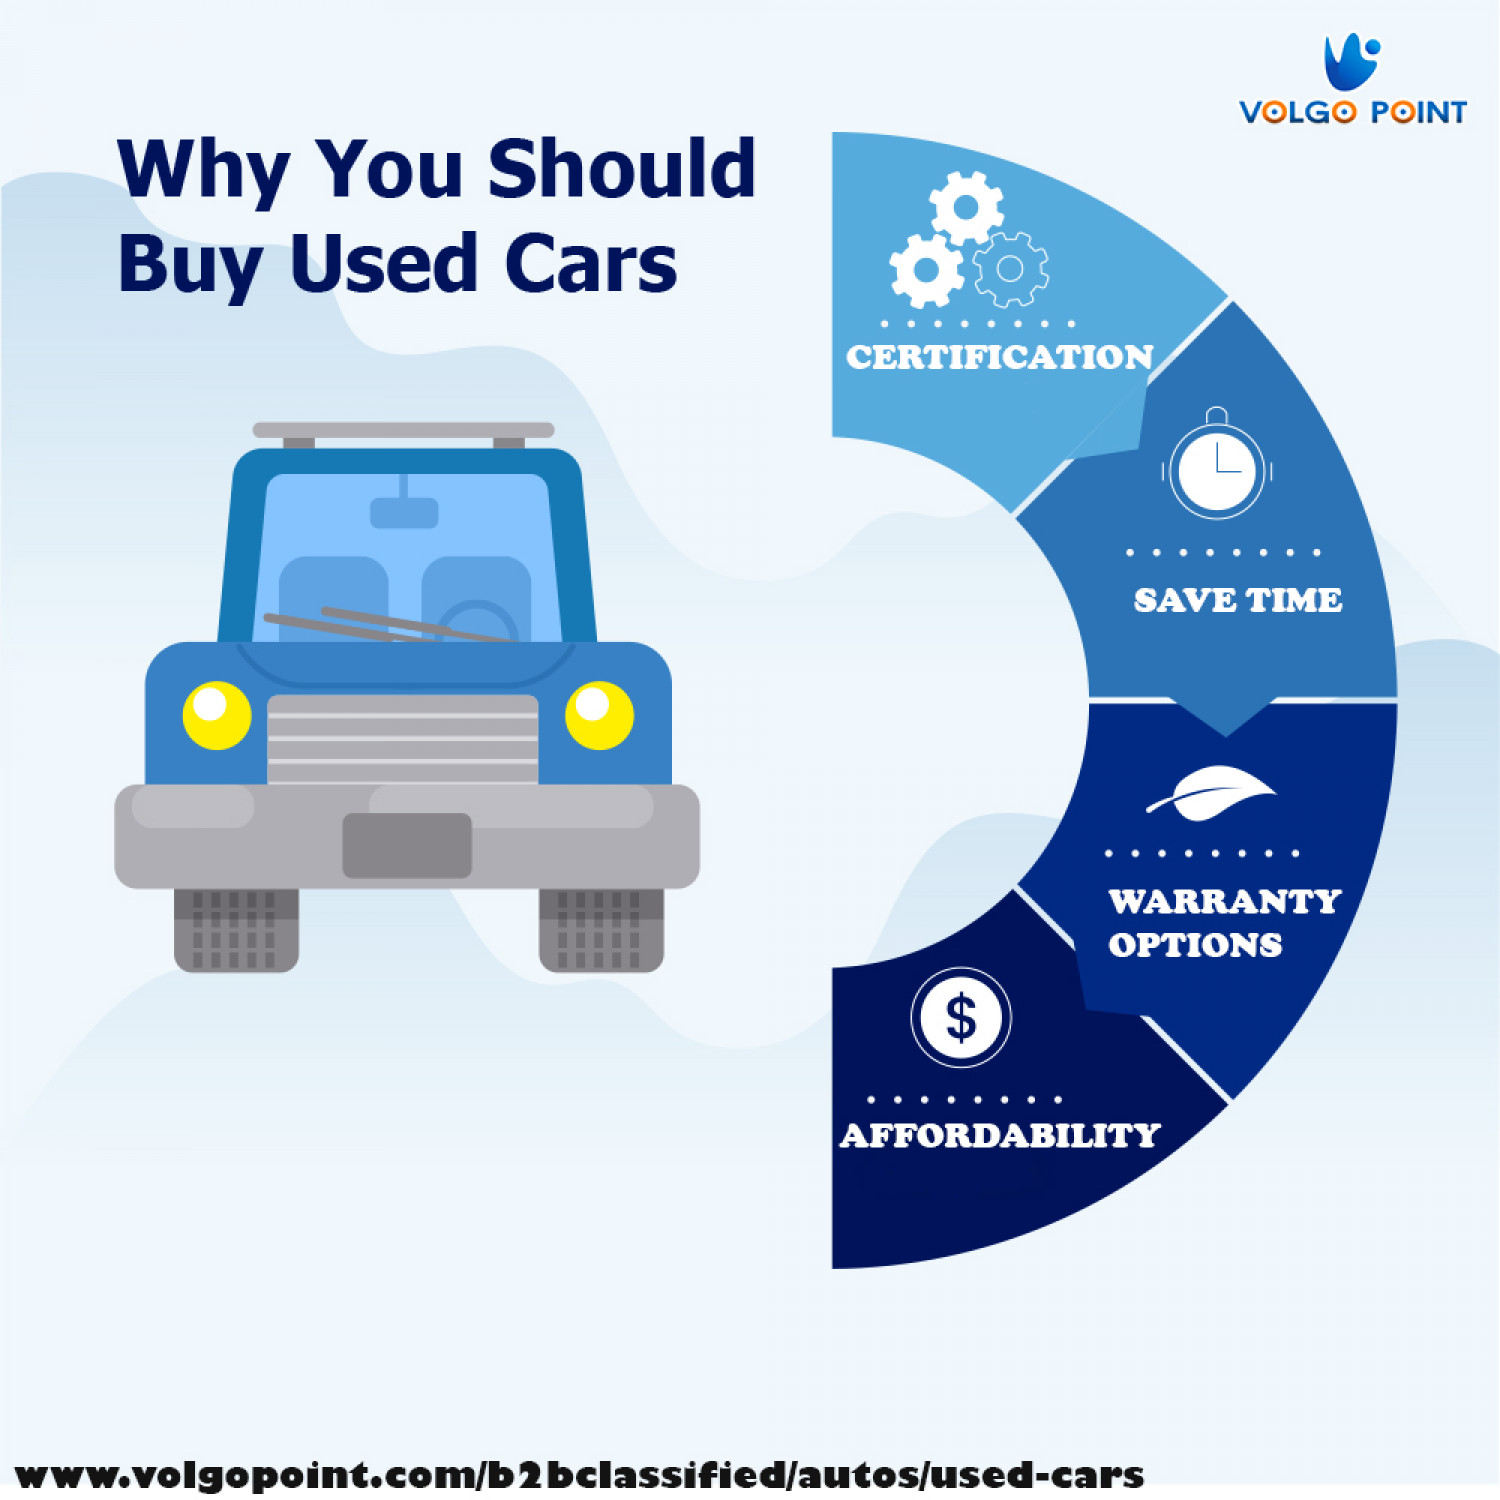 Why You Should Buy Used Car Infographic